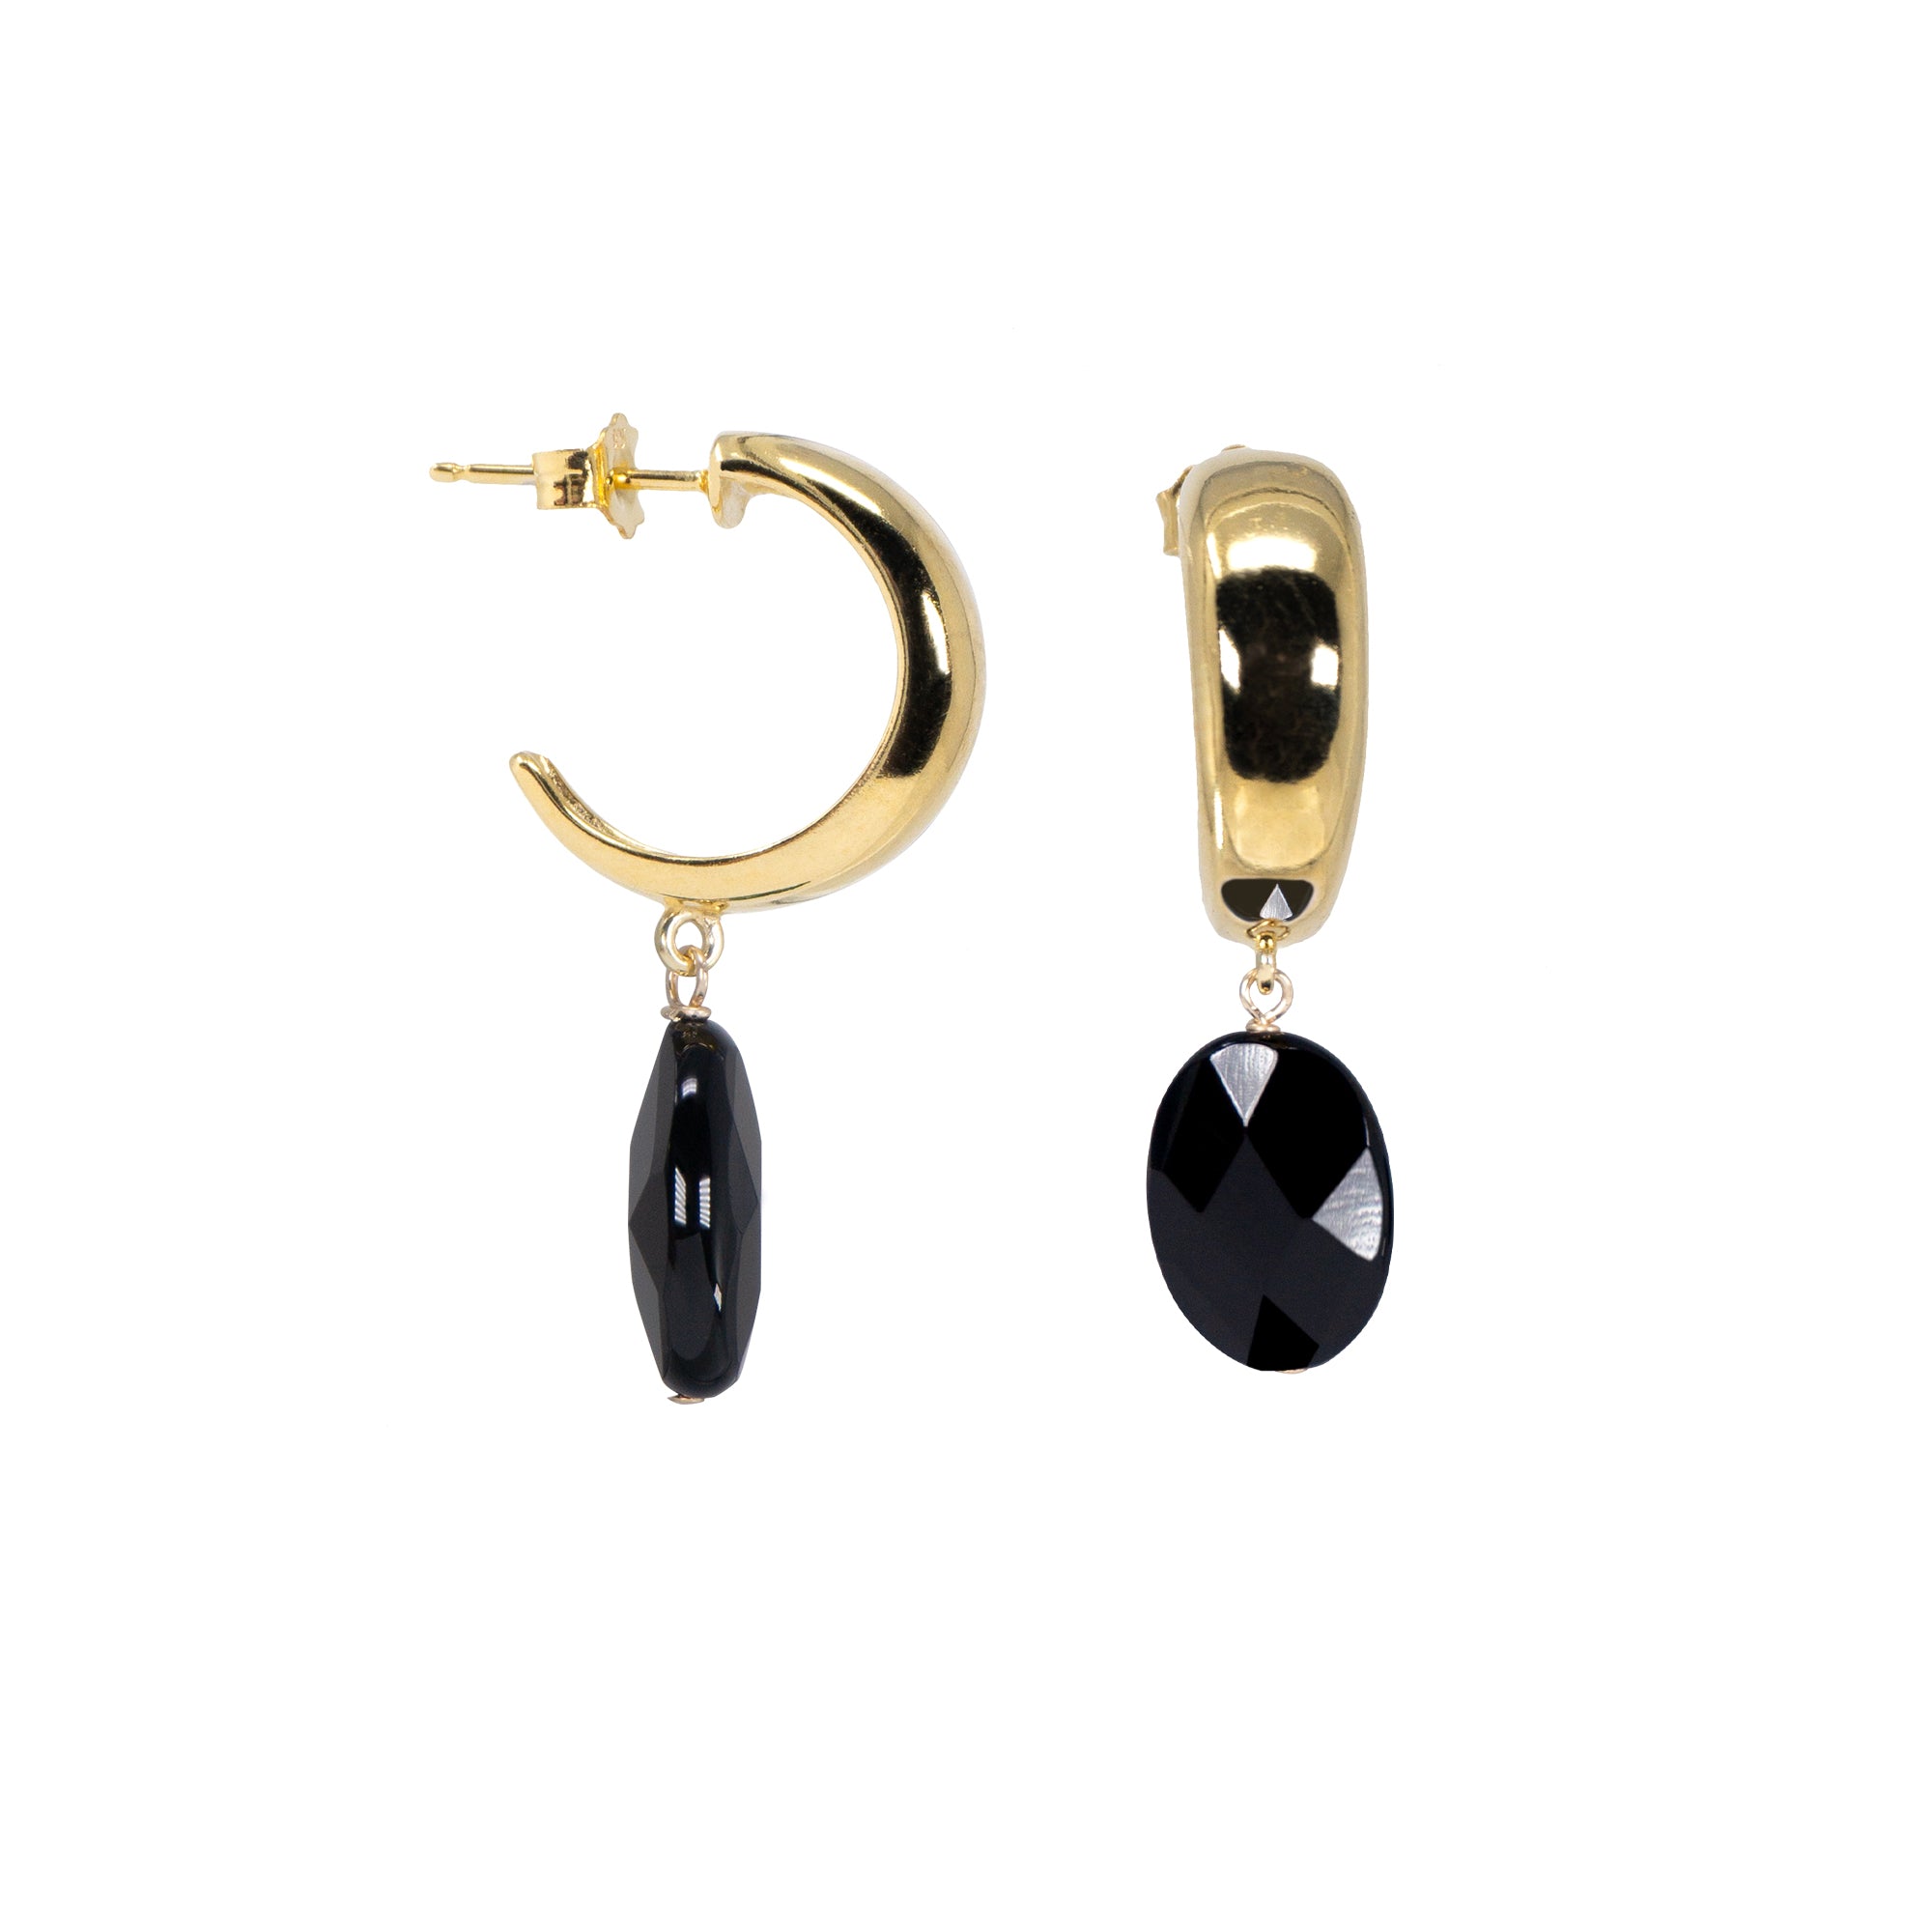 Gold filled hoops with black onyx